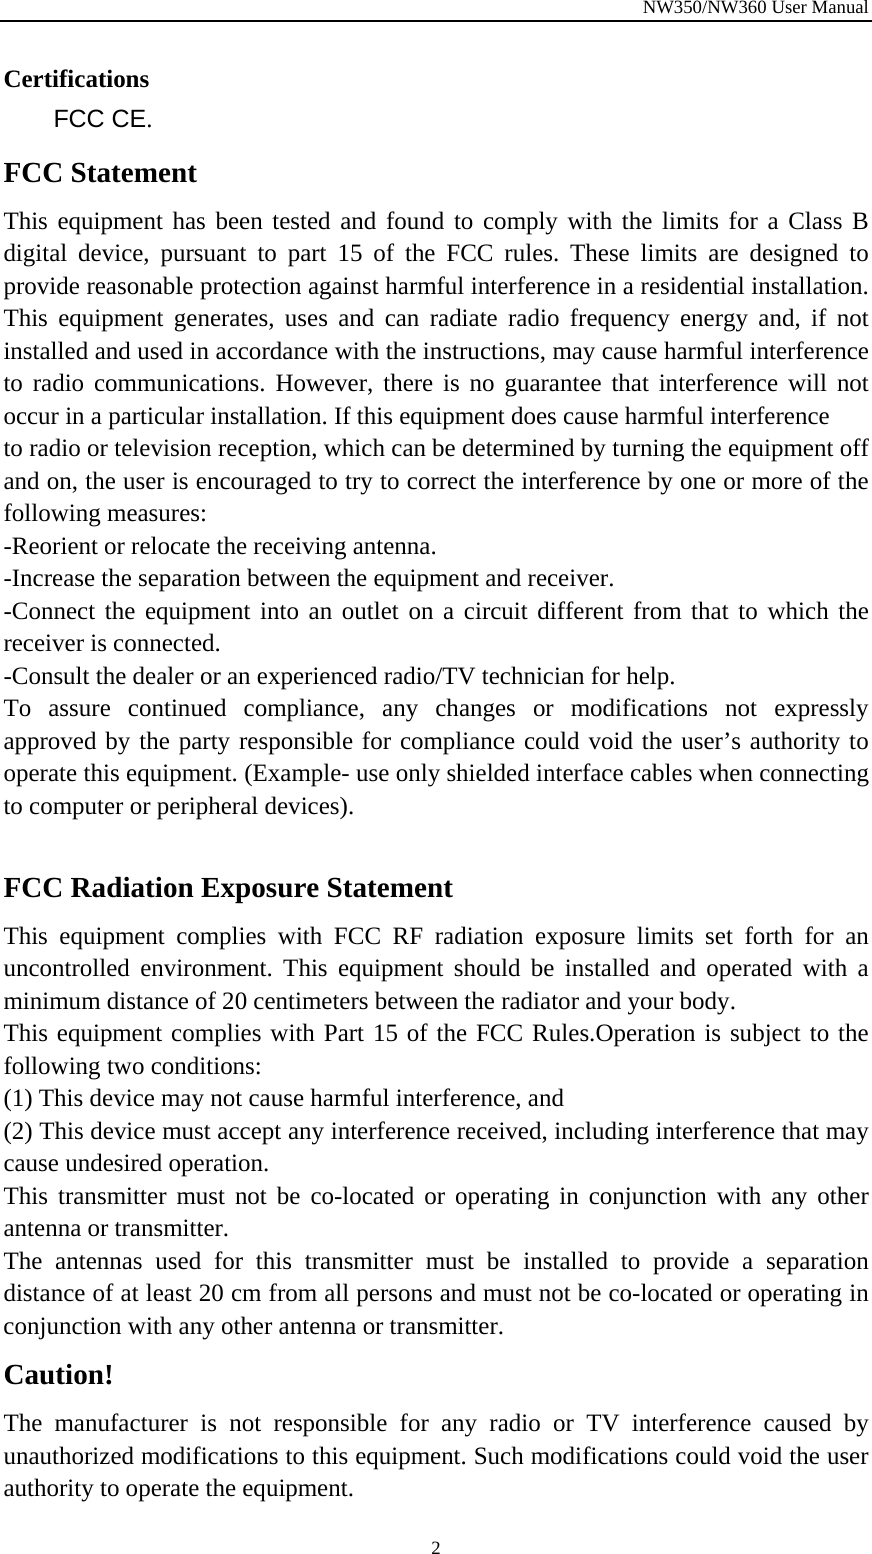 NW350/NW360 User Manual  2Certifications FCC CE. FCC Statement This equipment has been tested and found to comply with the limits for a Class B digital device, pursuant to part 15 of the FCC rules. These limits are designed to provide reasonable protection against harmful interference in a residential installation. This equipment generates, uses and can radiate radio frequency energy and, if not installed and used in accordance with the instructions, may cause harmful interference to radio communications. However, there is no guarantee that interference will not occur in a particular installation. If this equipment does cause harmful interference   to radio or television reception, which can be determined by turning the equipment off and on, the user is encouraged to try to correct the interference by one or more of the following measures: -Reorient or relocate the receiving antenna. -Increase the separation between the equipment and receiver. -Connect the equipment into an outlet on a circuit different from that to which the receiver is connected. -Consult the dealer or an experienced radio/TV technician for help. To assure continued compliance, any changes or modifications not expressly approved by the party responsible for compliance could void the user’s authority to operate this equipment. (Example- use only shielded interface cables when connecting to computer or peripheral devices).  FCC Radiation Exposure Statement       This equipment complies with FCC RF radiation exposure limits set forth for an uncontrolled environment. This equipment should be installed and operated with a minimum distance of 20 centimeters between the radiator and your body.   This equipment complies with Part 15 of the FCC Rules.Operation is subject to the following two conditions:     (1) This device may not cause harmful interference, and     (2) This device must accept any interference received, including interference that may cause undesired operation.     This transmitter must not be co-located or operating in conjunction with any other antenna or transmitter.   The antennas used for this transmitter must be installed to provide a separation distance of at least 20 cm from all persons and must not be co-located or operating in conjunction with any other antenna or transmitter. Caution!  The manufacturer is not responsible for any radio or TV interference caused by unauthorized modifications to this equipment. Such modifications could void the user authority to operate the equipment. 